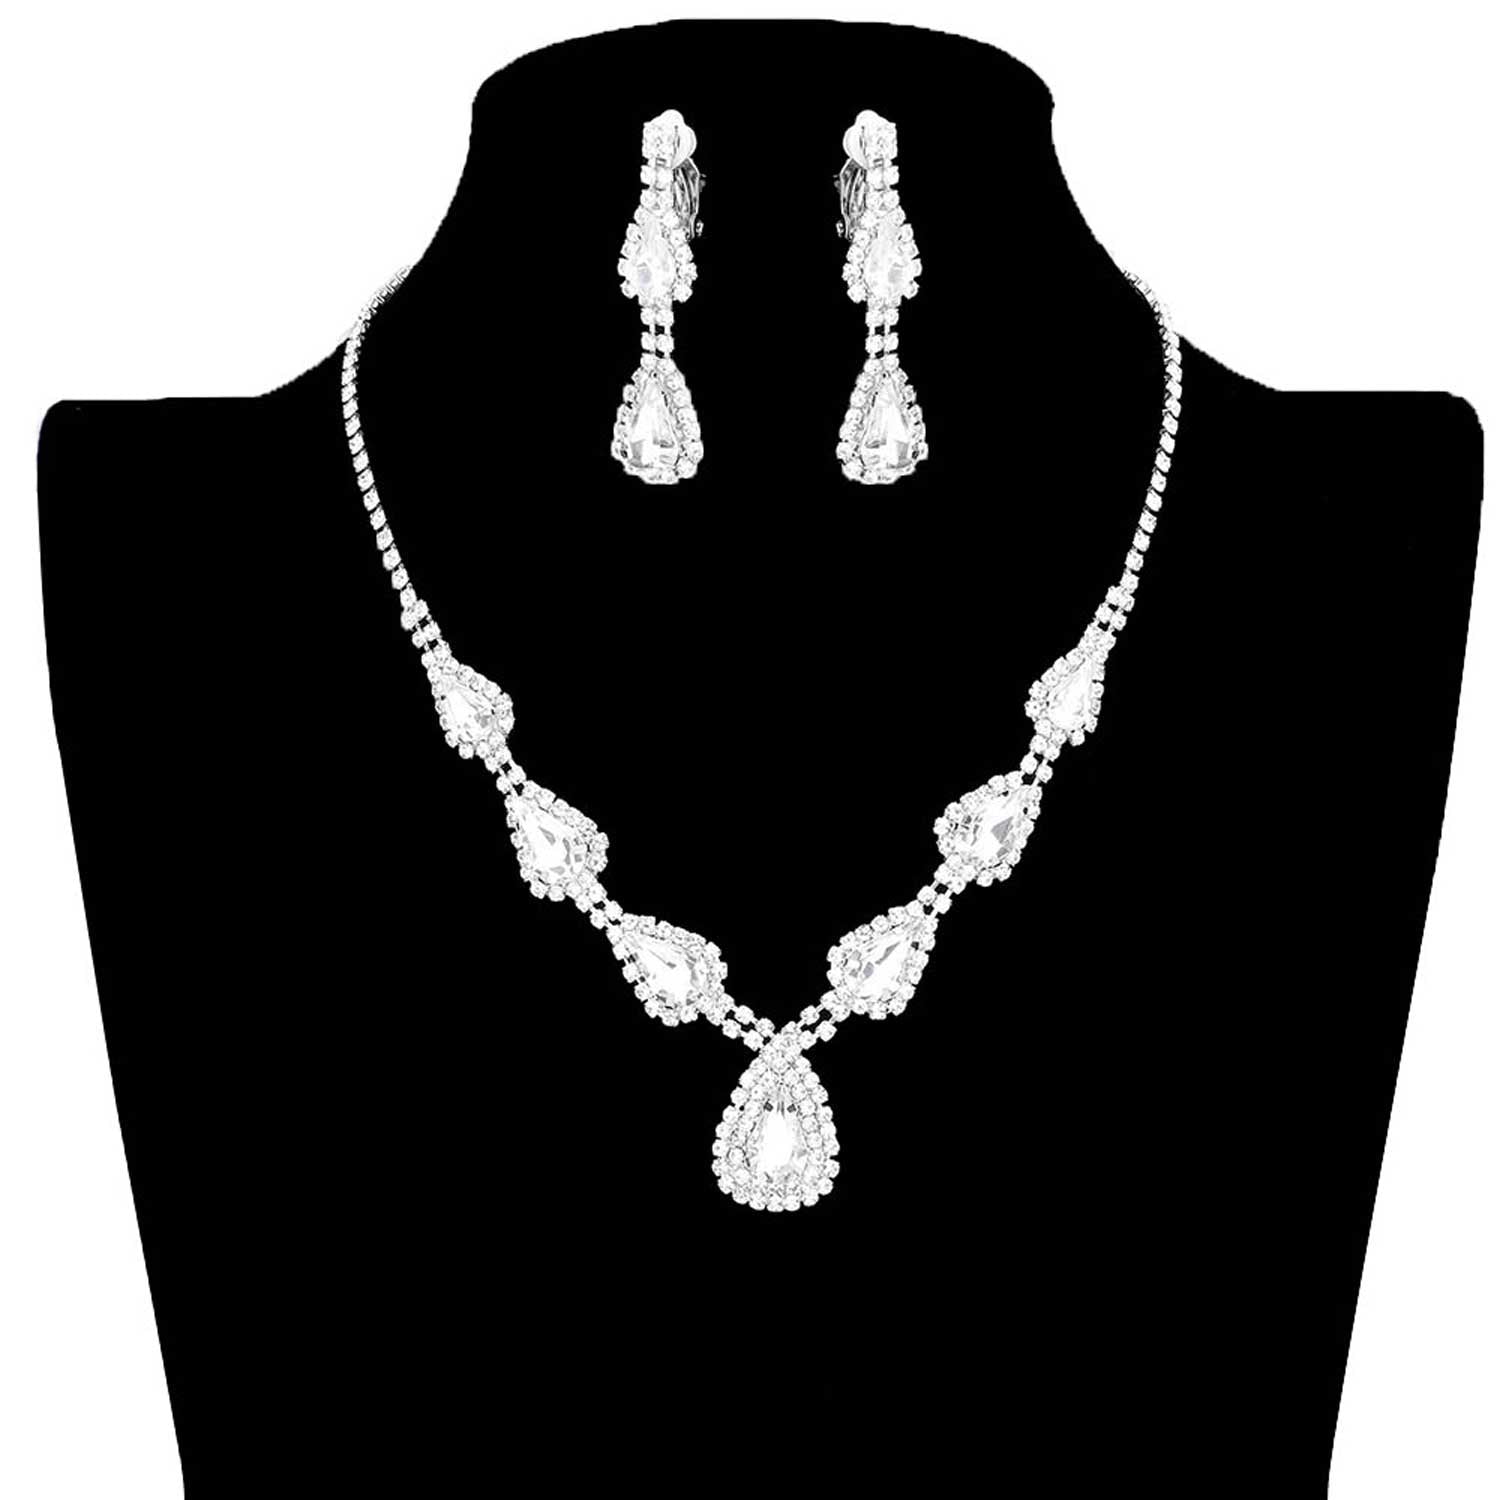 Silver Teardrop Stone Accented Rhinestone Pave Necklace, brings a gorgeous glow to your outfit to show off the royalty on any special occasion. These gorgeous Rhinestone pieces will show your class in any special occasion. The elegance of these Rhinestone goes unmatched, great for wearing at a party! Perfect jewelry to enhance your look. Awesome gift for birthday, Anniversary or any special occasion.